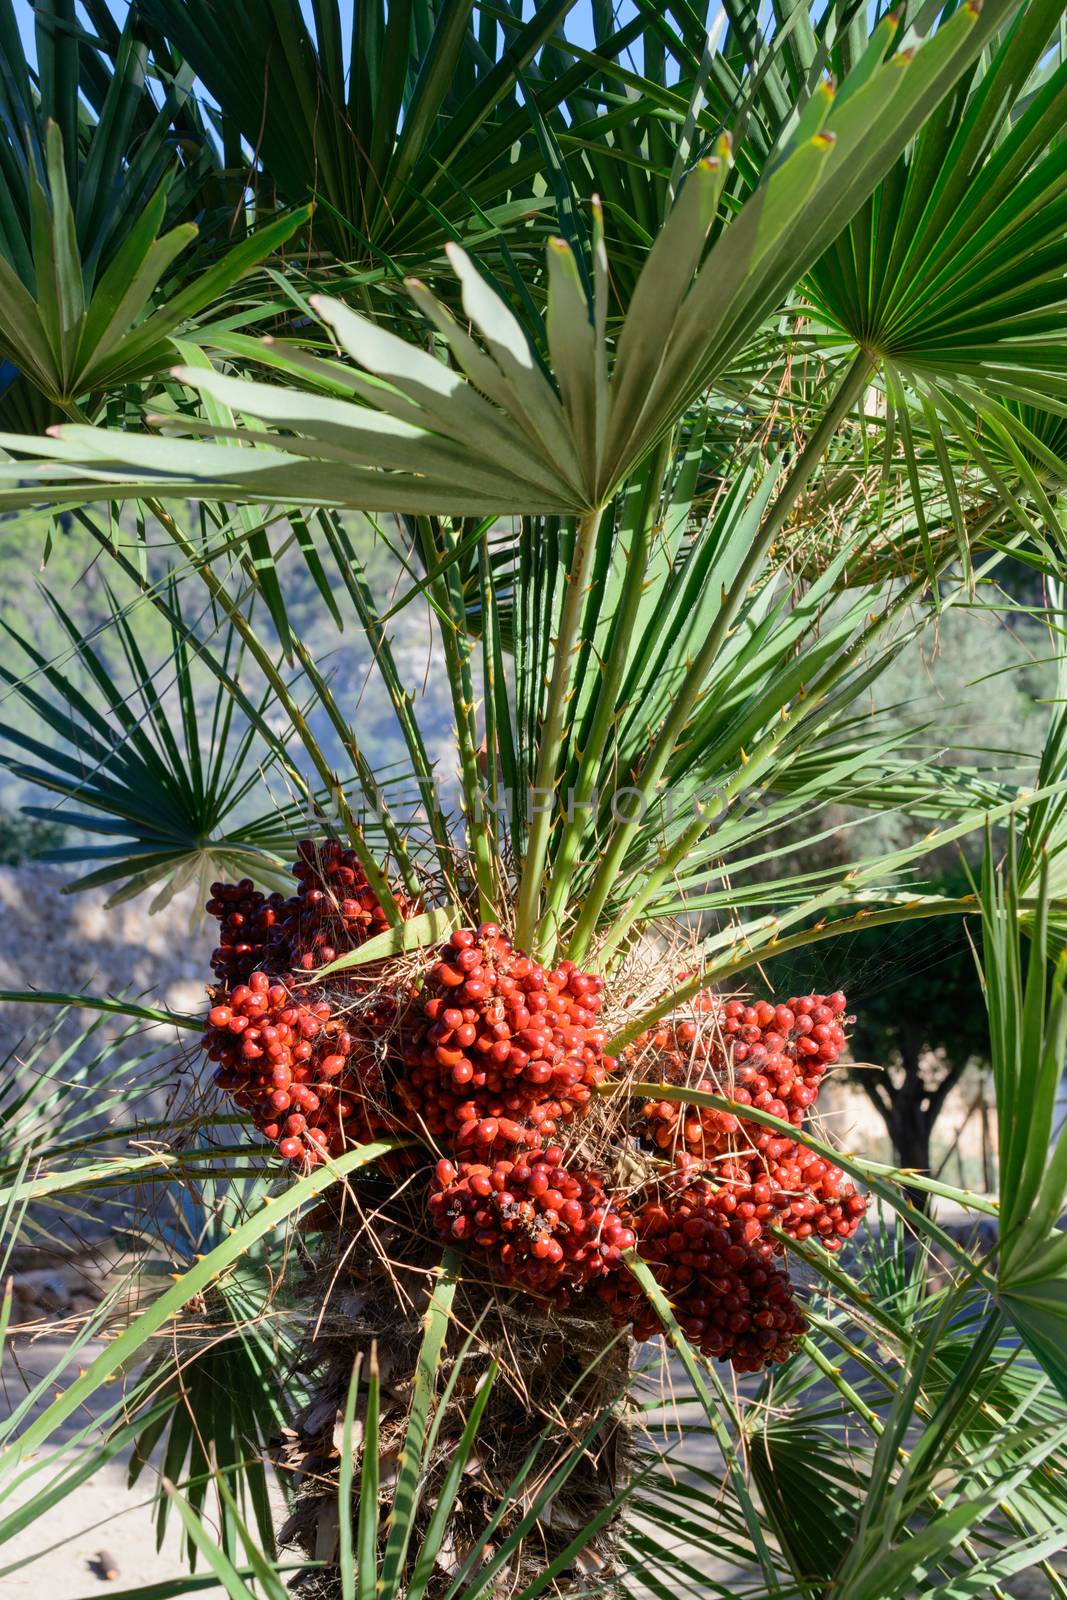 Endemic fan palm, Chamaerops humilis, with red berries